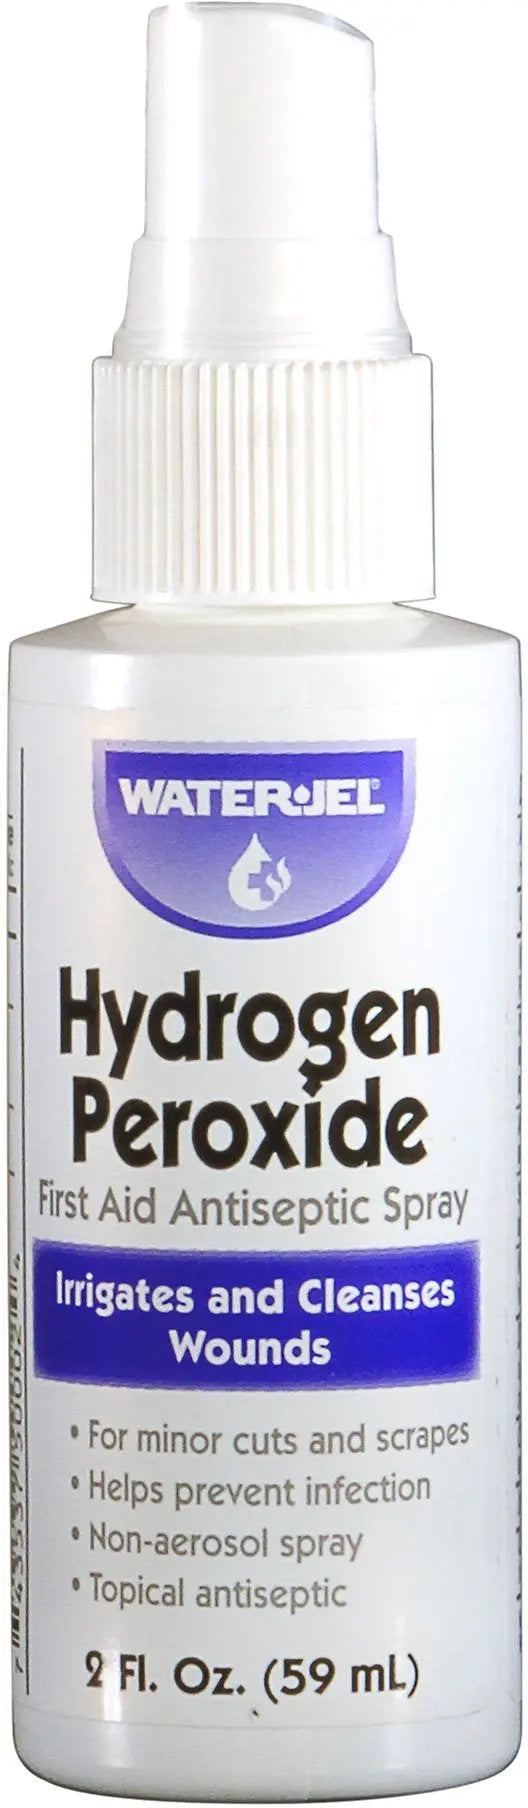 Water Jel Hydrogen Peroxide First Aid Antiseptic Spray